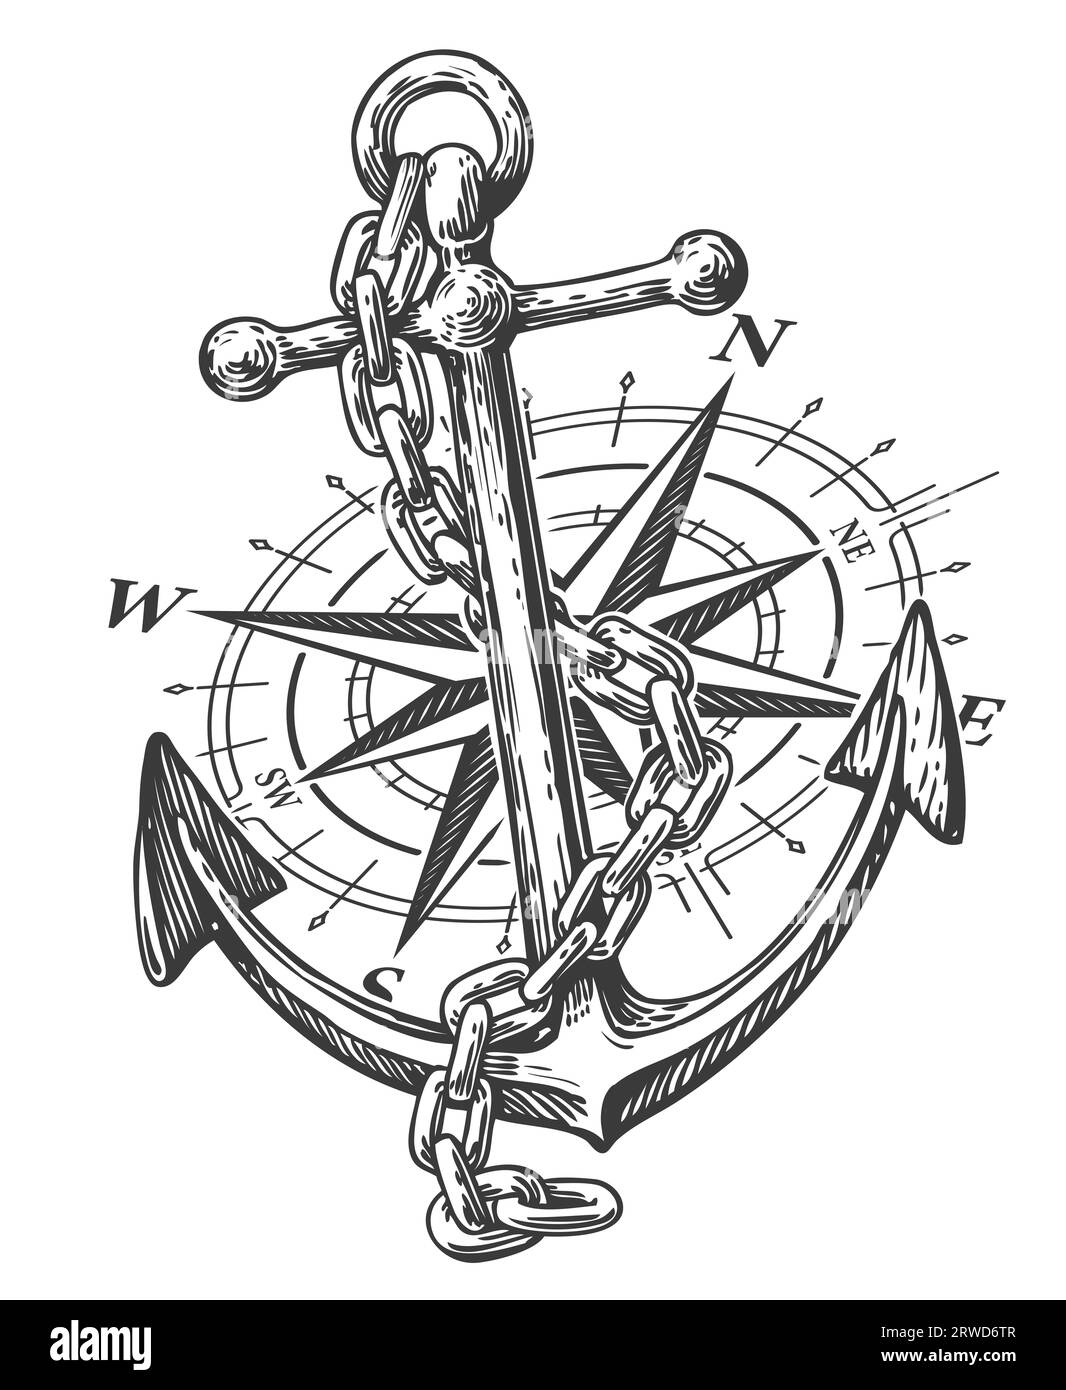 Hand drawn anchor with chain and nautical compass in engraving style. Sketch vintage illustration Stock Photo